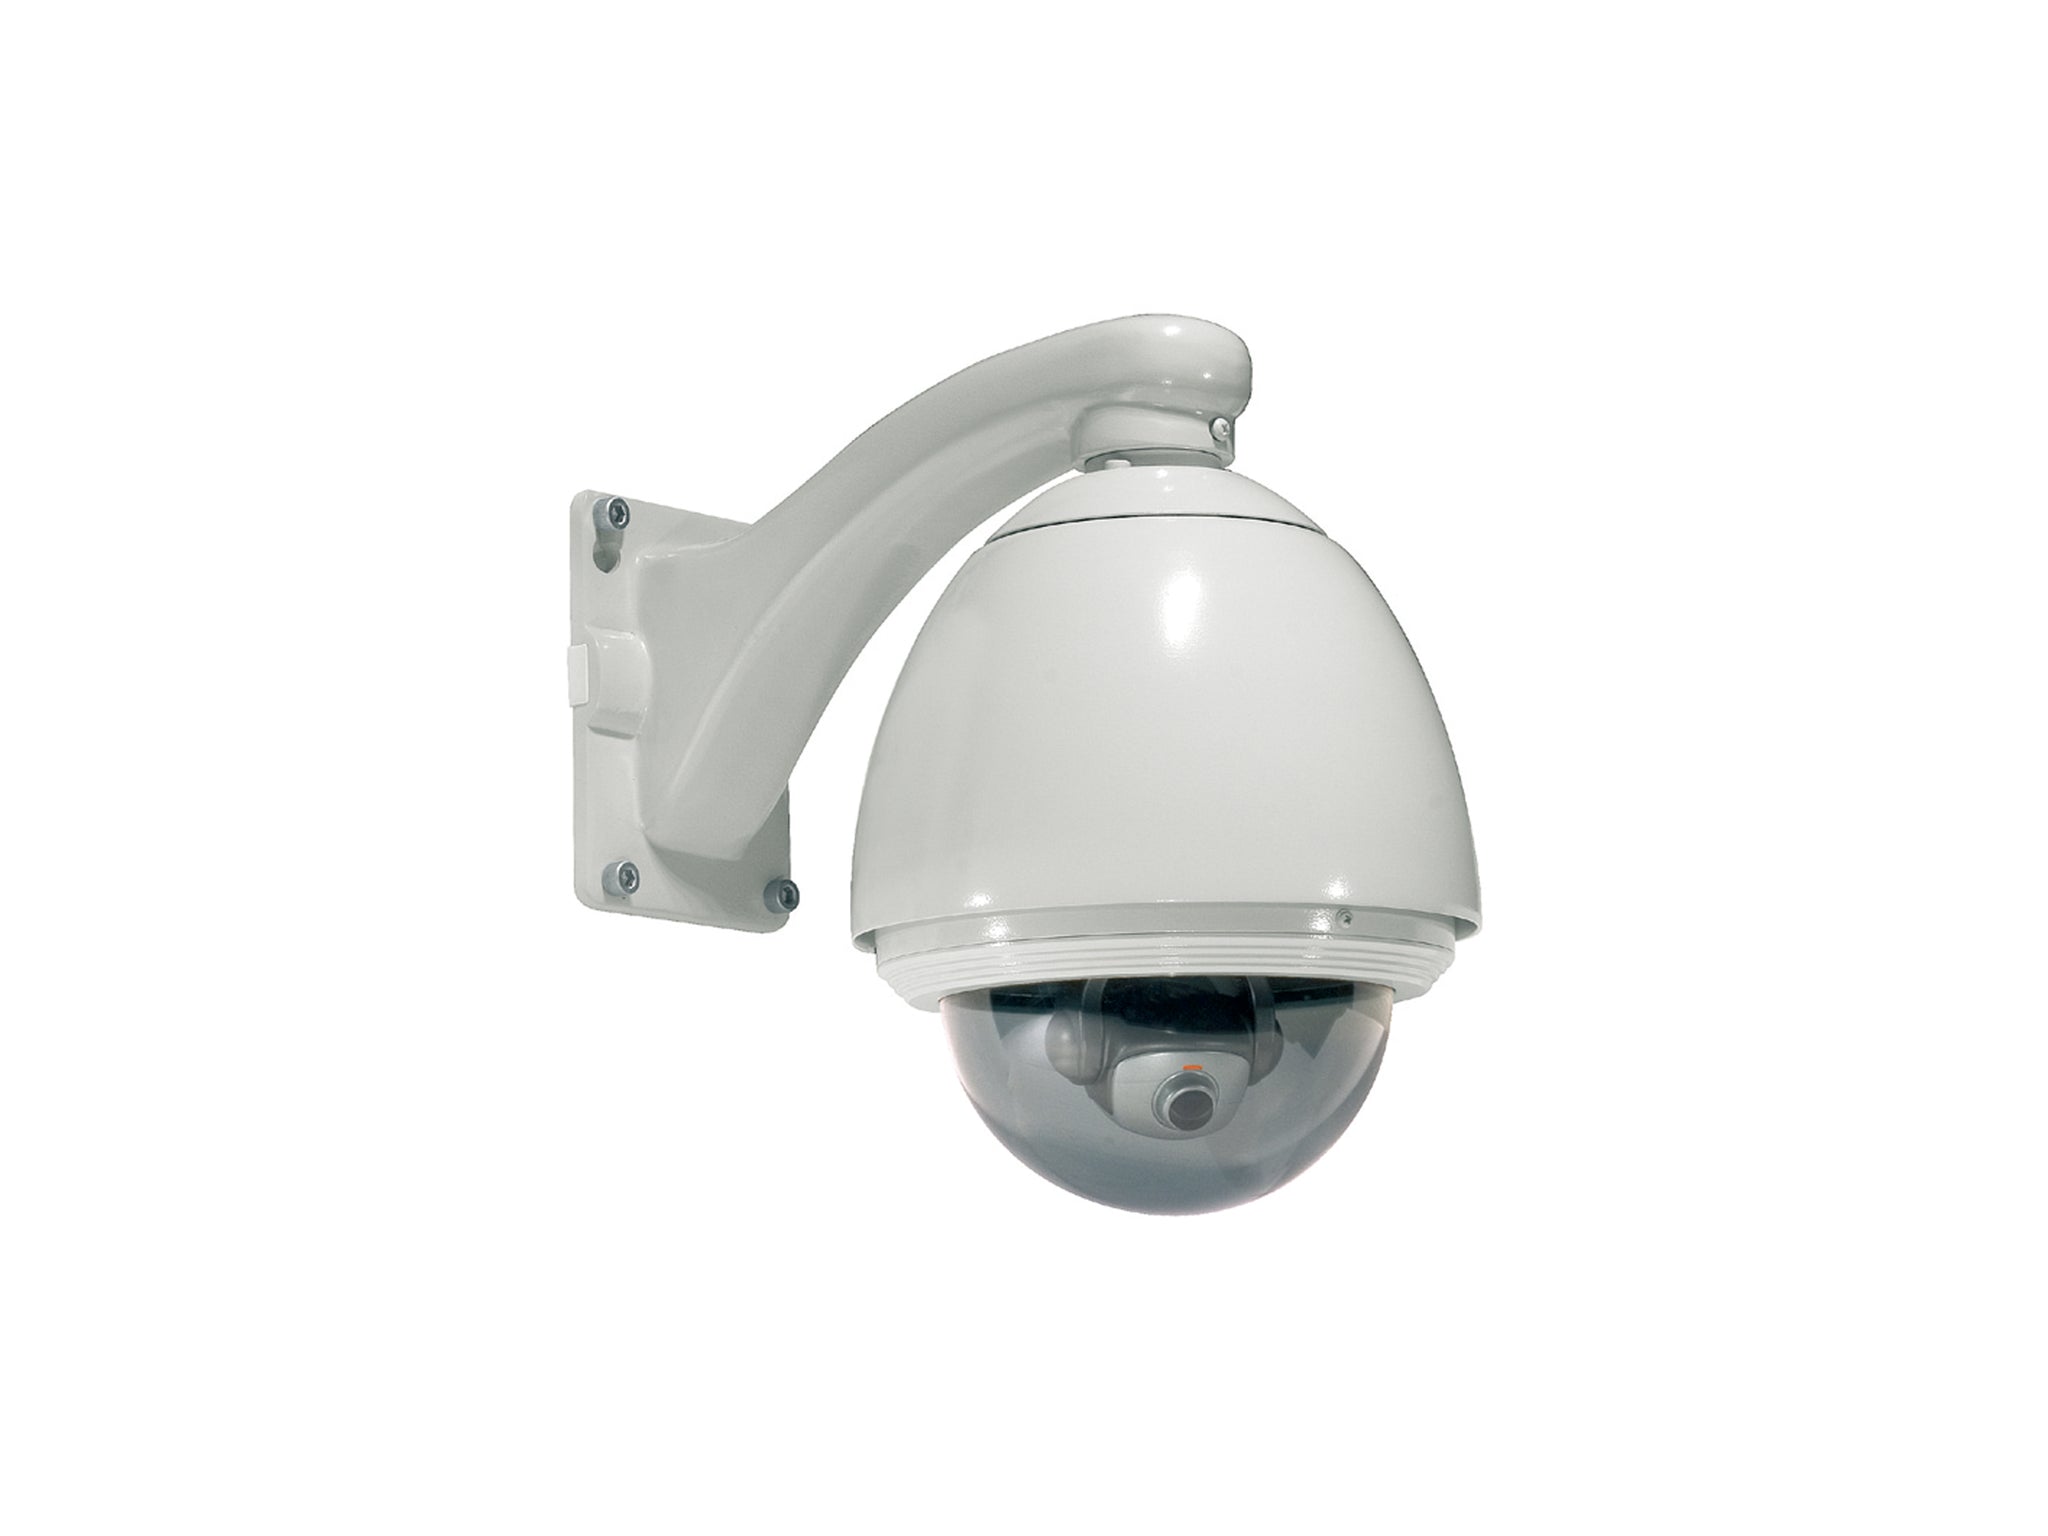 DOH-1100 DOMED OUTDOOR HOUSING